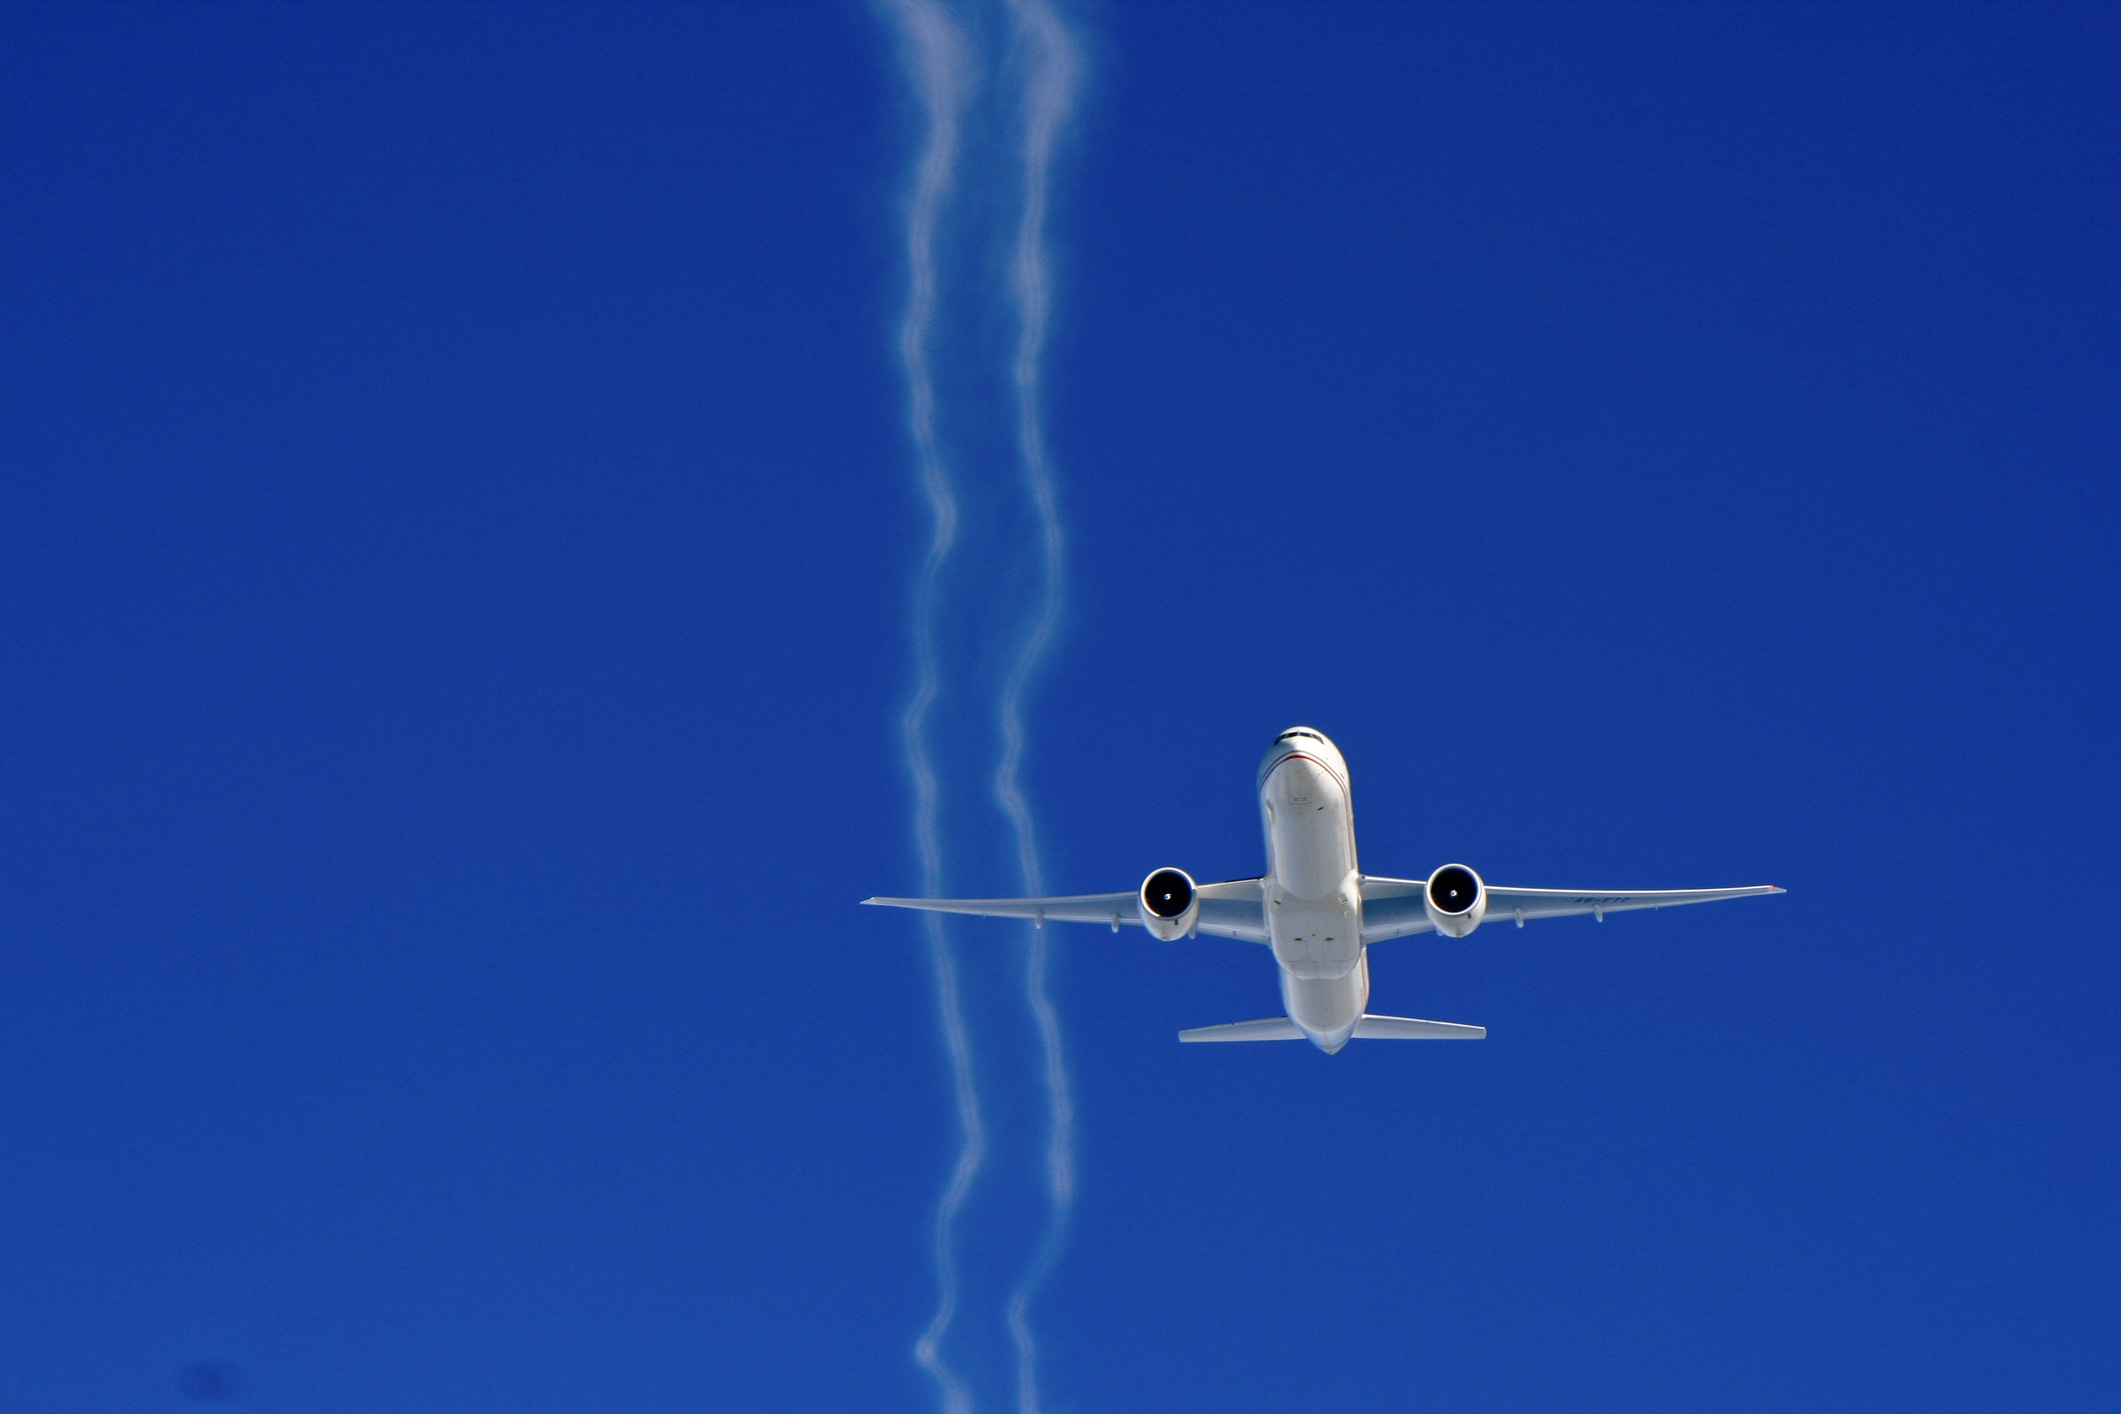 Etihad Boeing 777 with contrails on blue